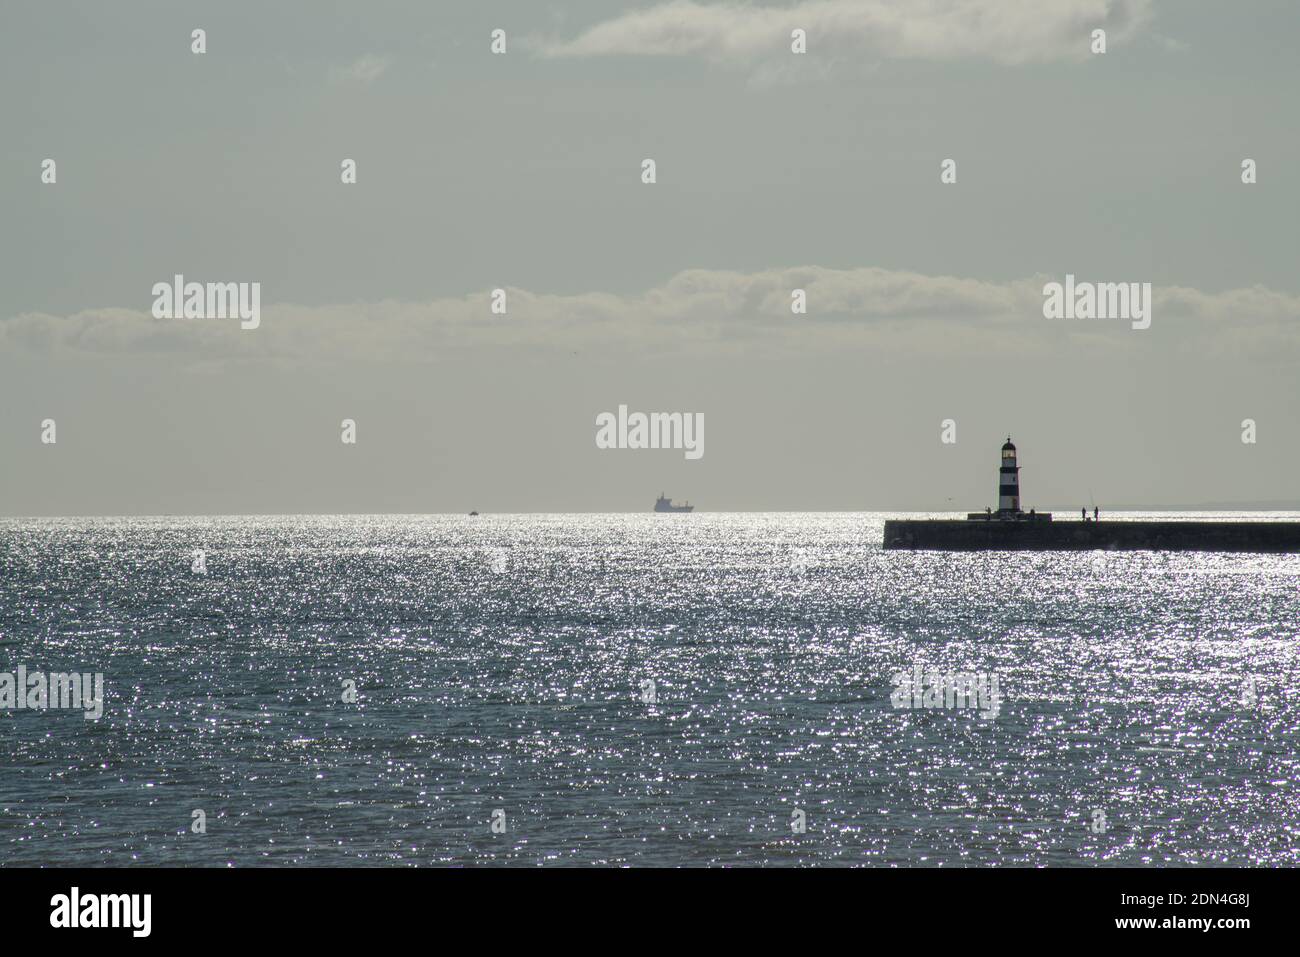 Image of late afternoon, with sunlight glinting on a calm sea at the entrance to Seaham Harbour with a ship out at sea and figures on sea wall Stock Photo